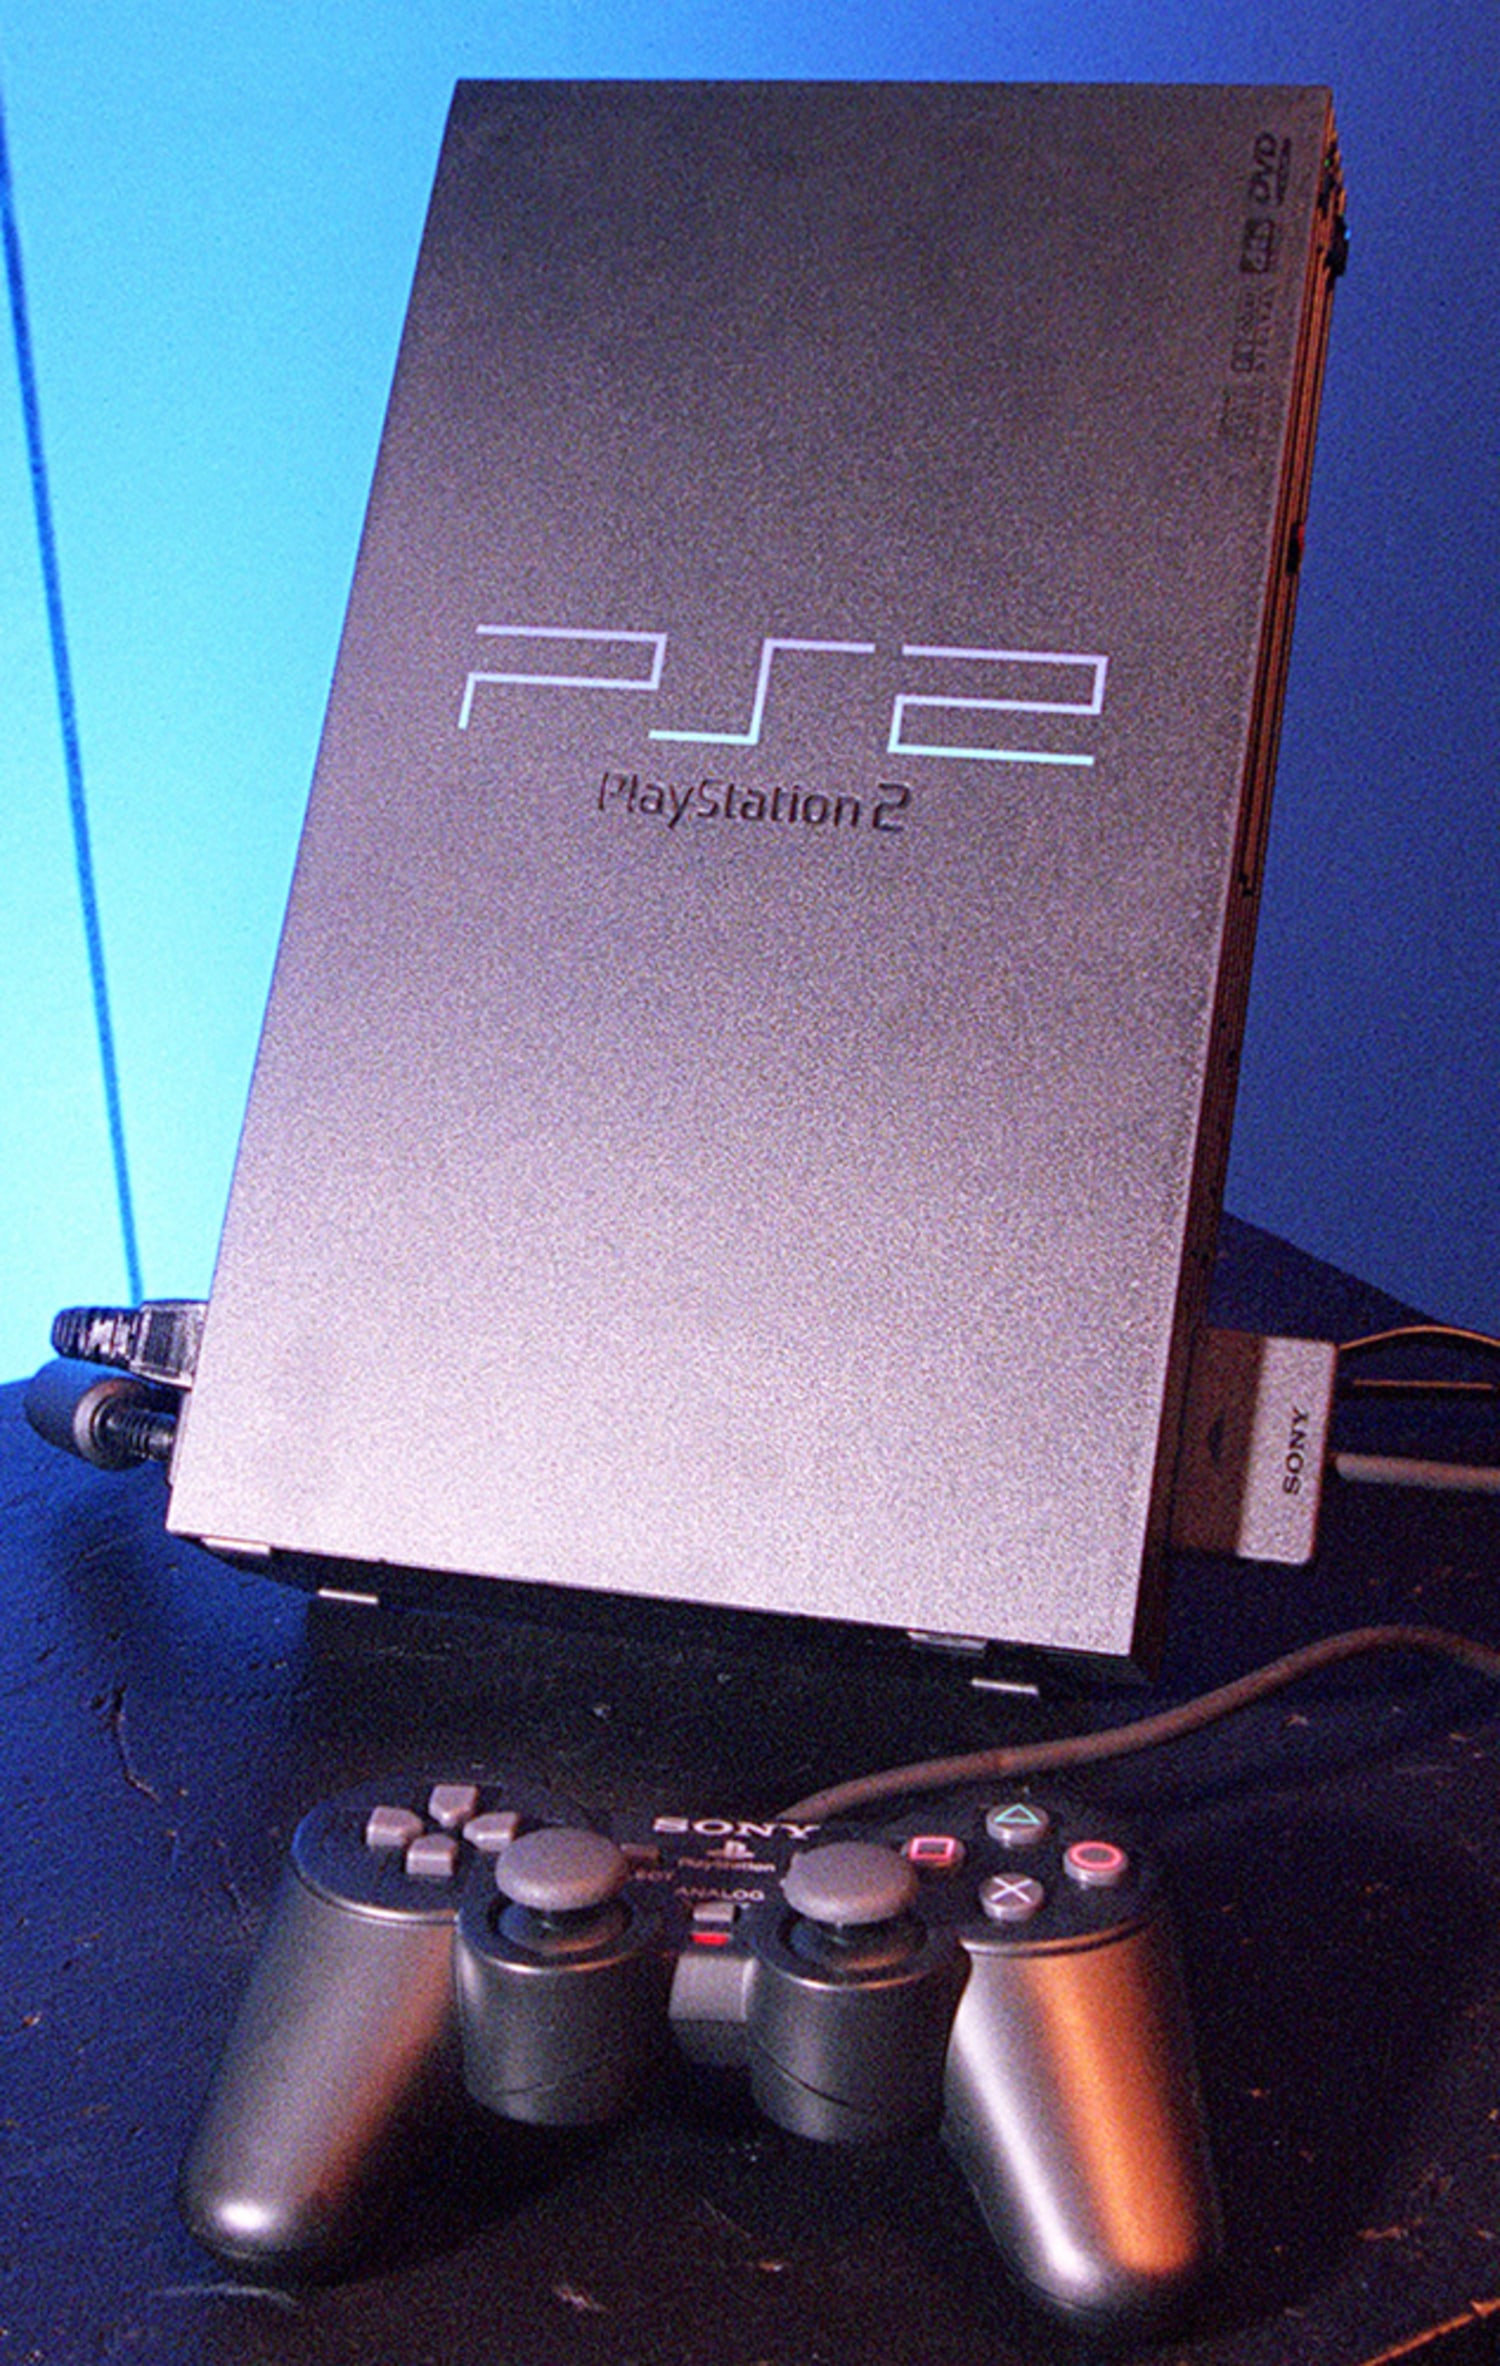 Sony PlayStation 2 Slim Console - Satin Silver for sale online